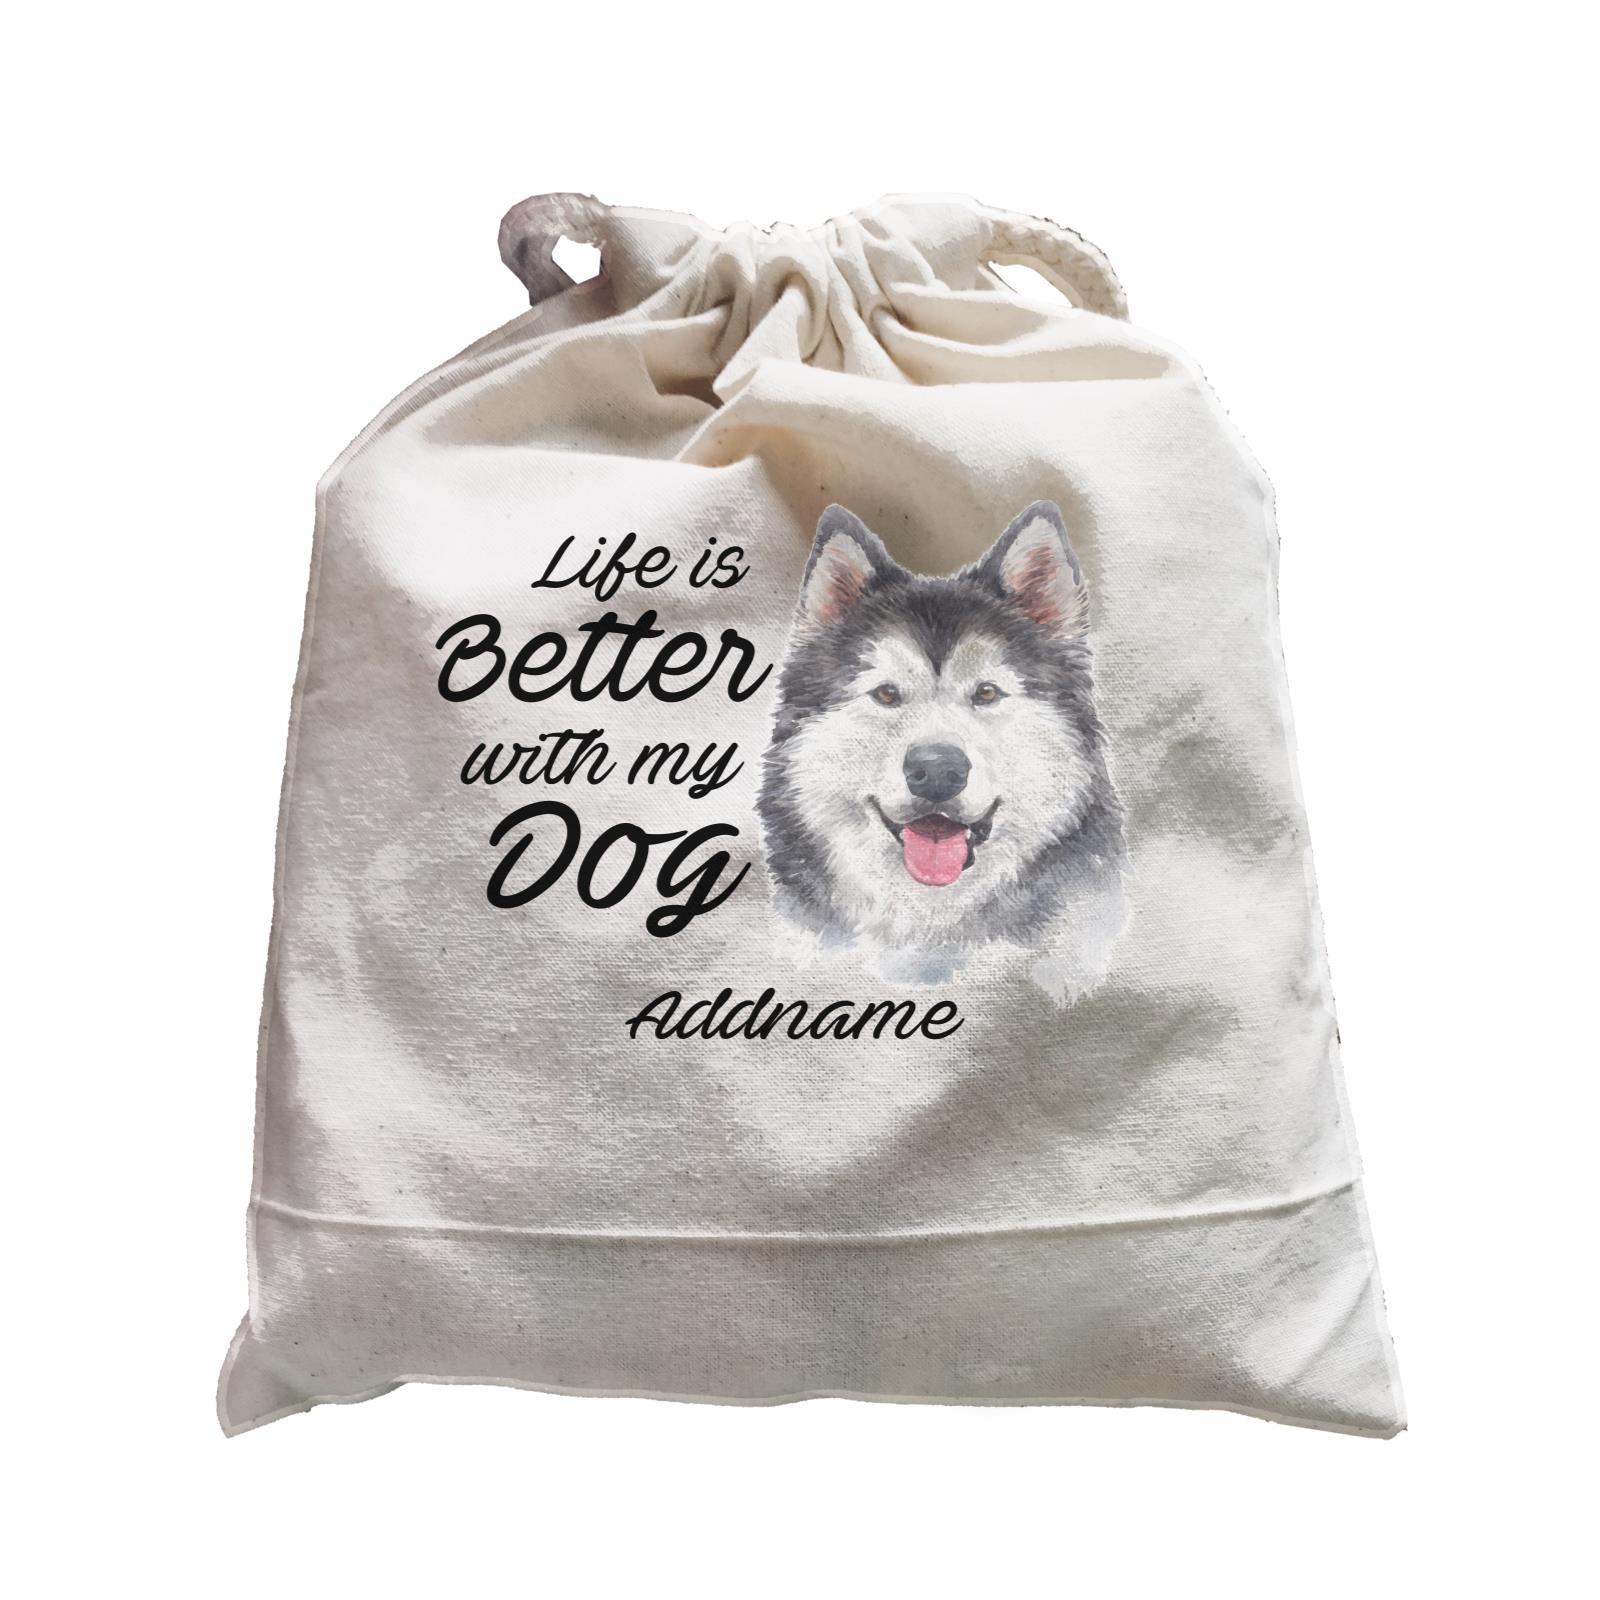 Watercolor Life is Better With My Dog Siberian Husky Smile Addname Satchel